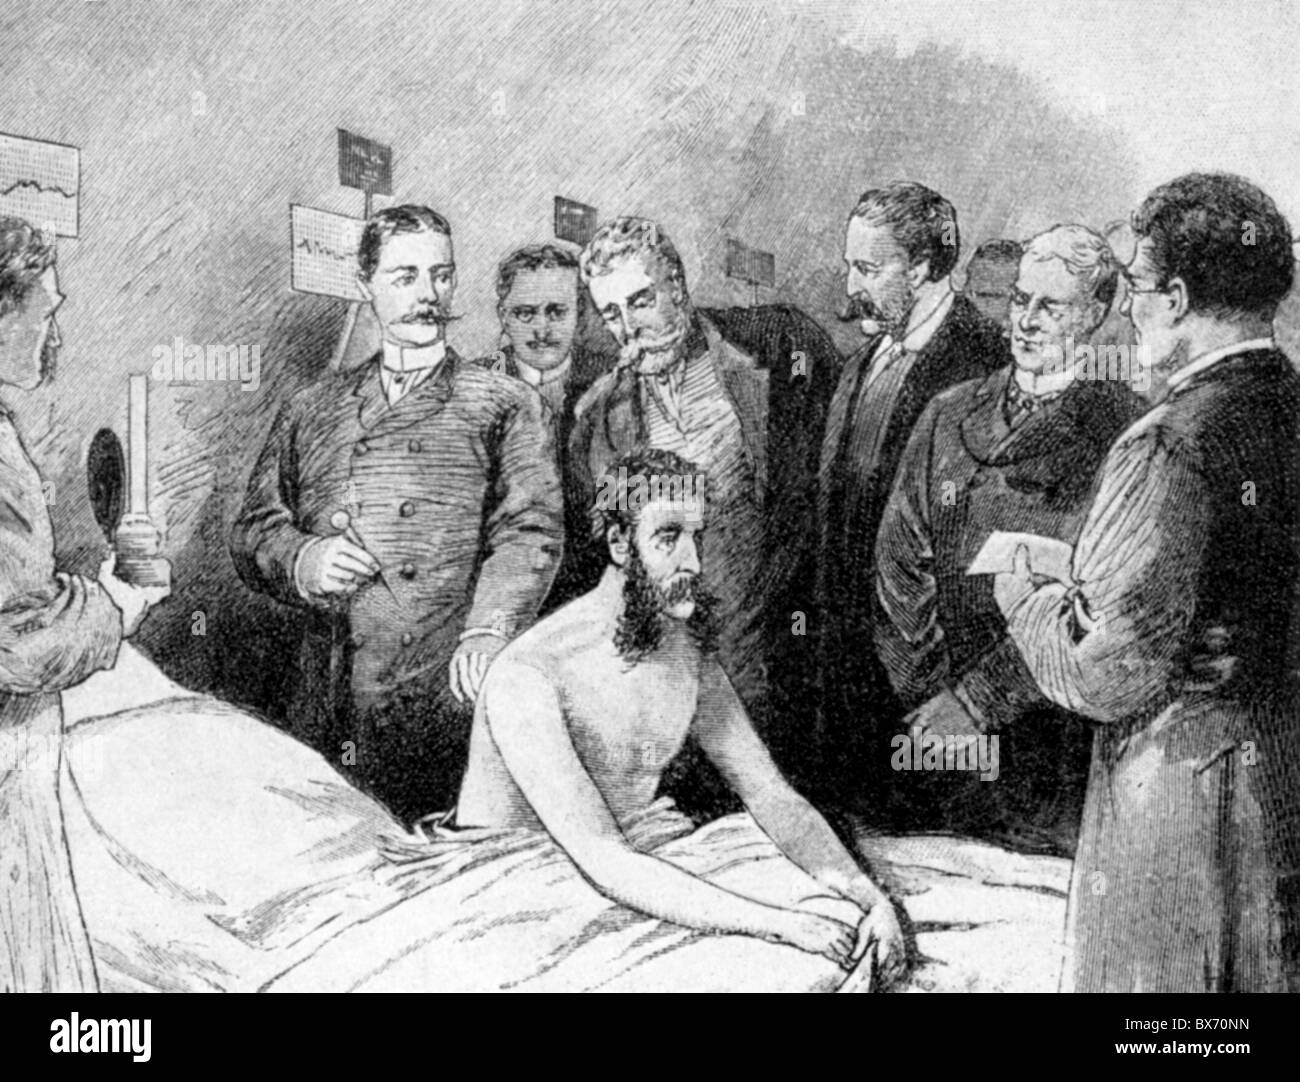 Koch, Robert, 11.12.1843 - 27. 5.1910, German physician, vaccinating a  patient at Charité Hospital, wood engraving, 19th century Stock Photo -  Alamy